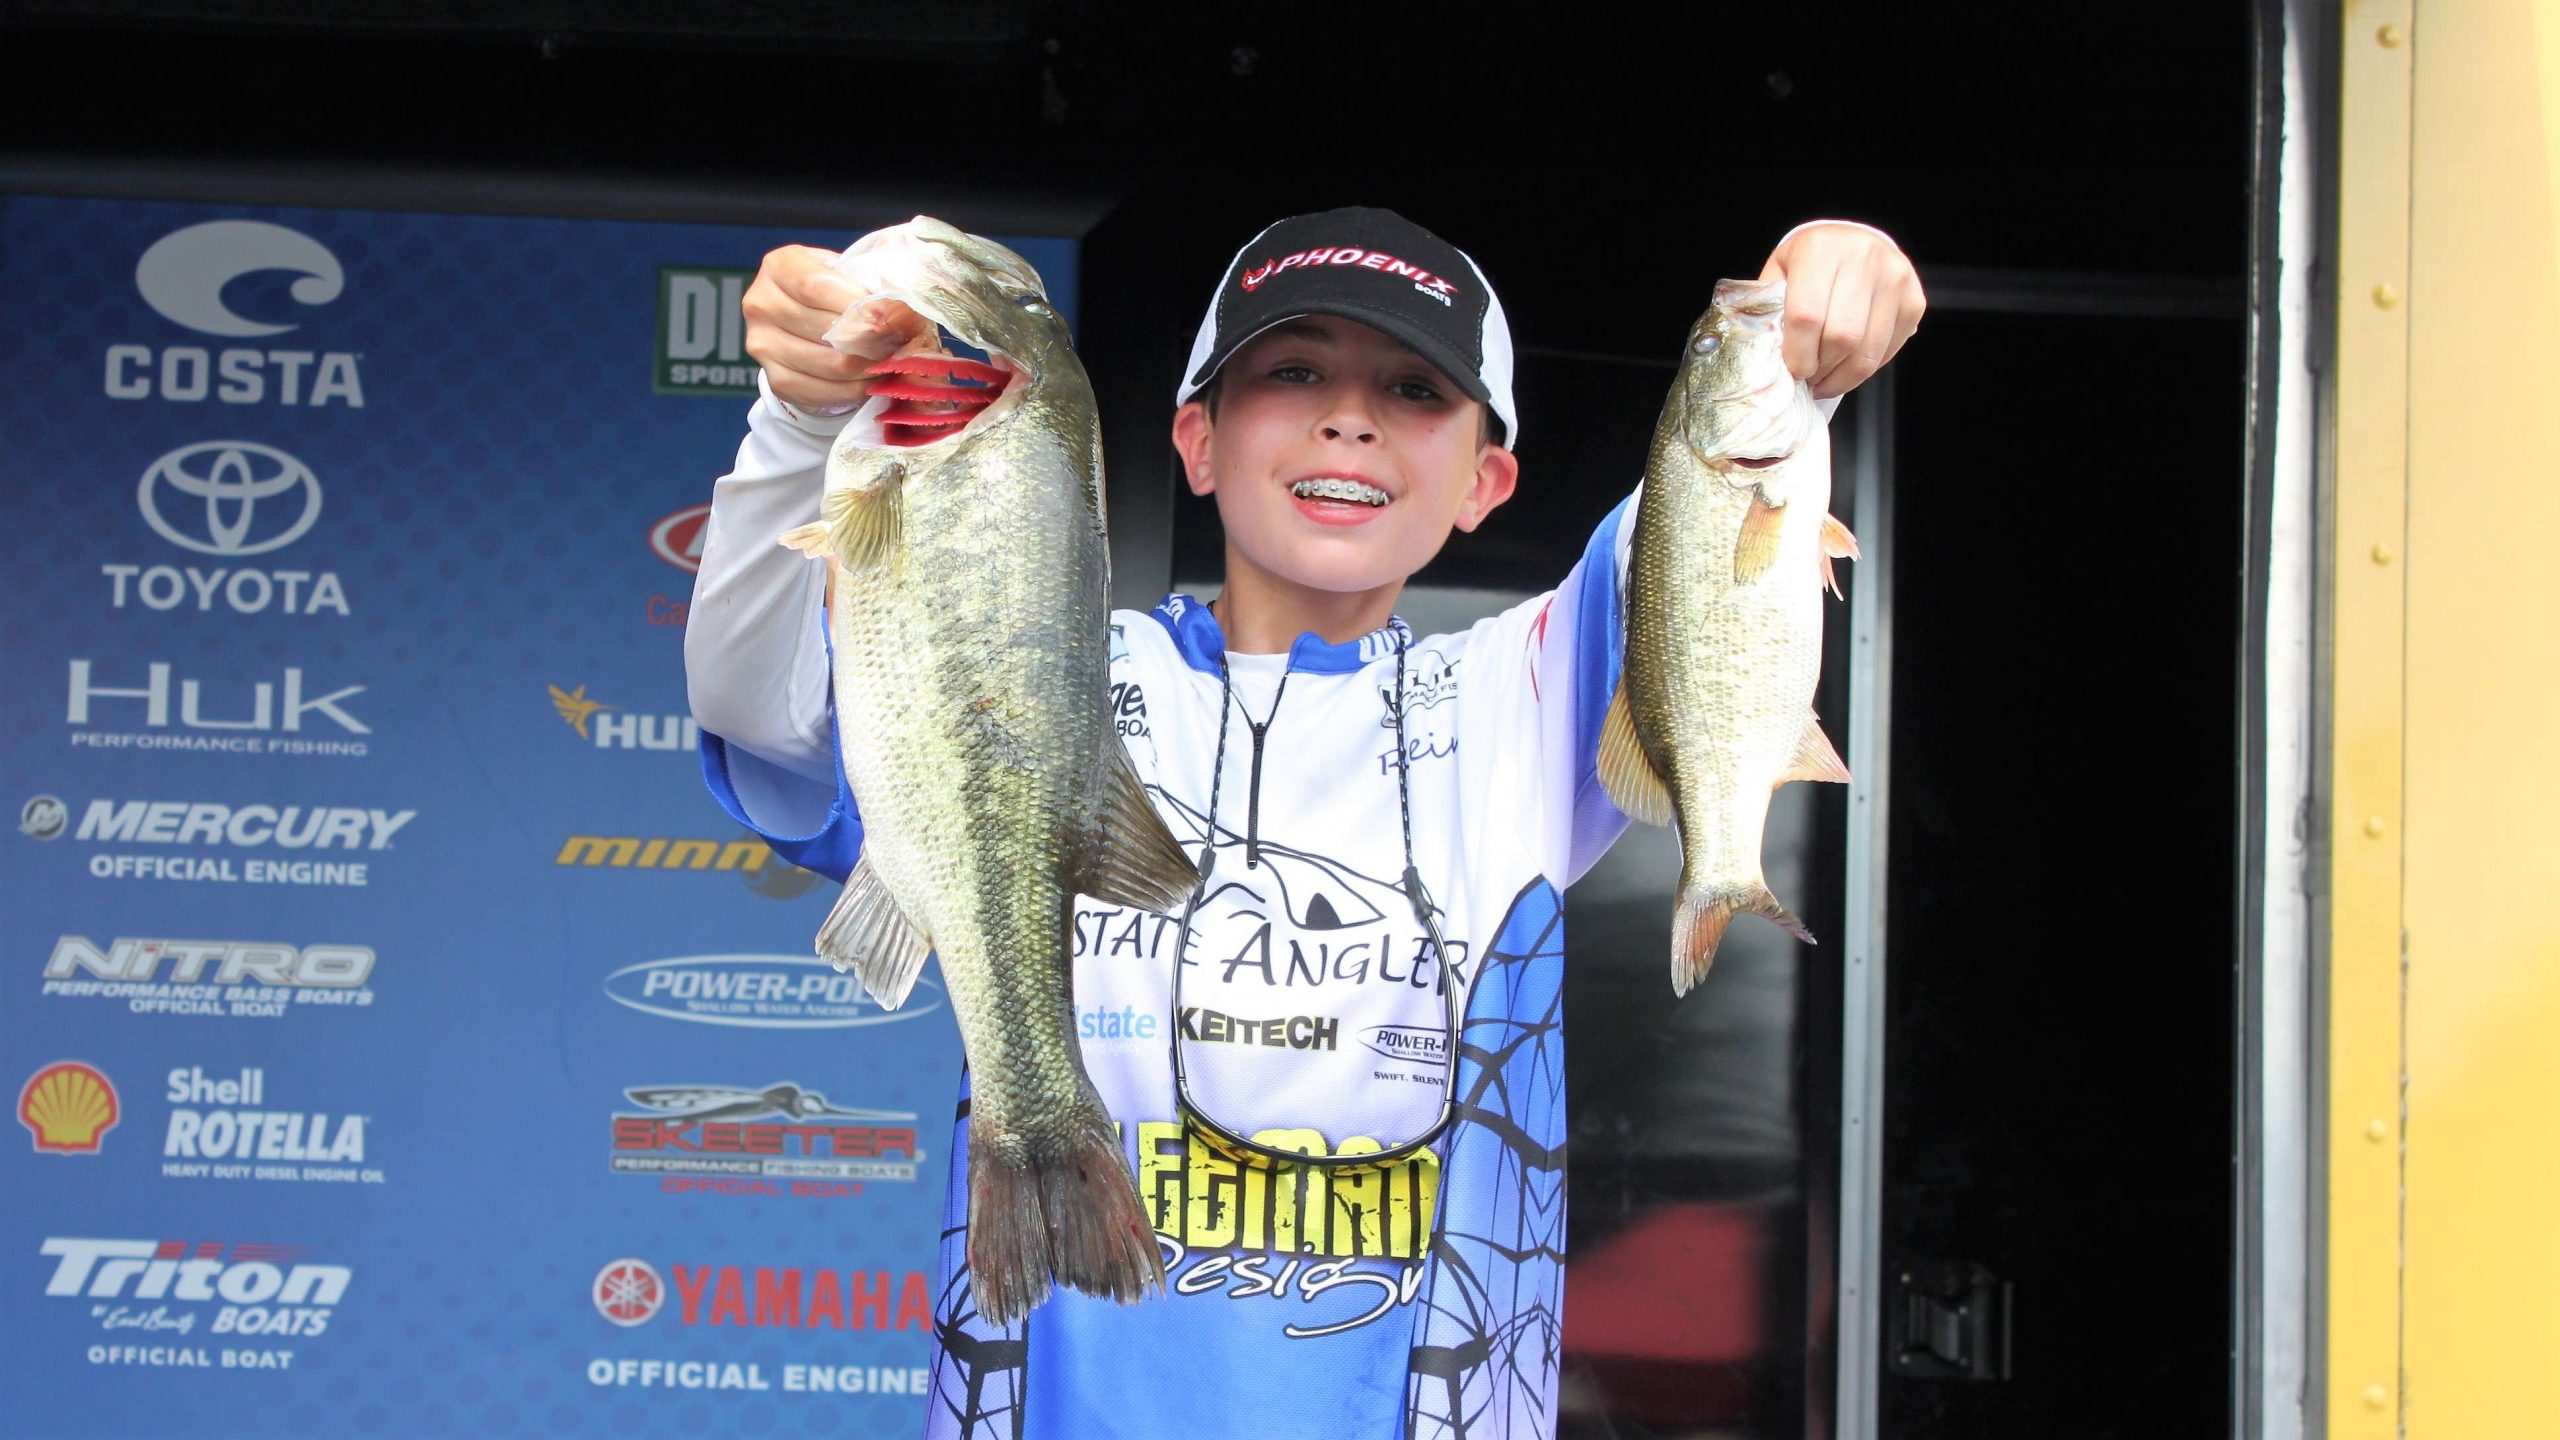  He would not. Golubjatnikov landed five bass that weighed 7-15, which put him in second place with a two-day total of 23-12.
